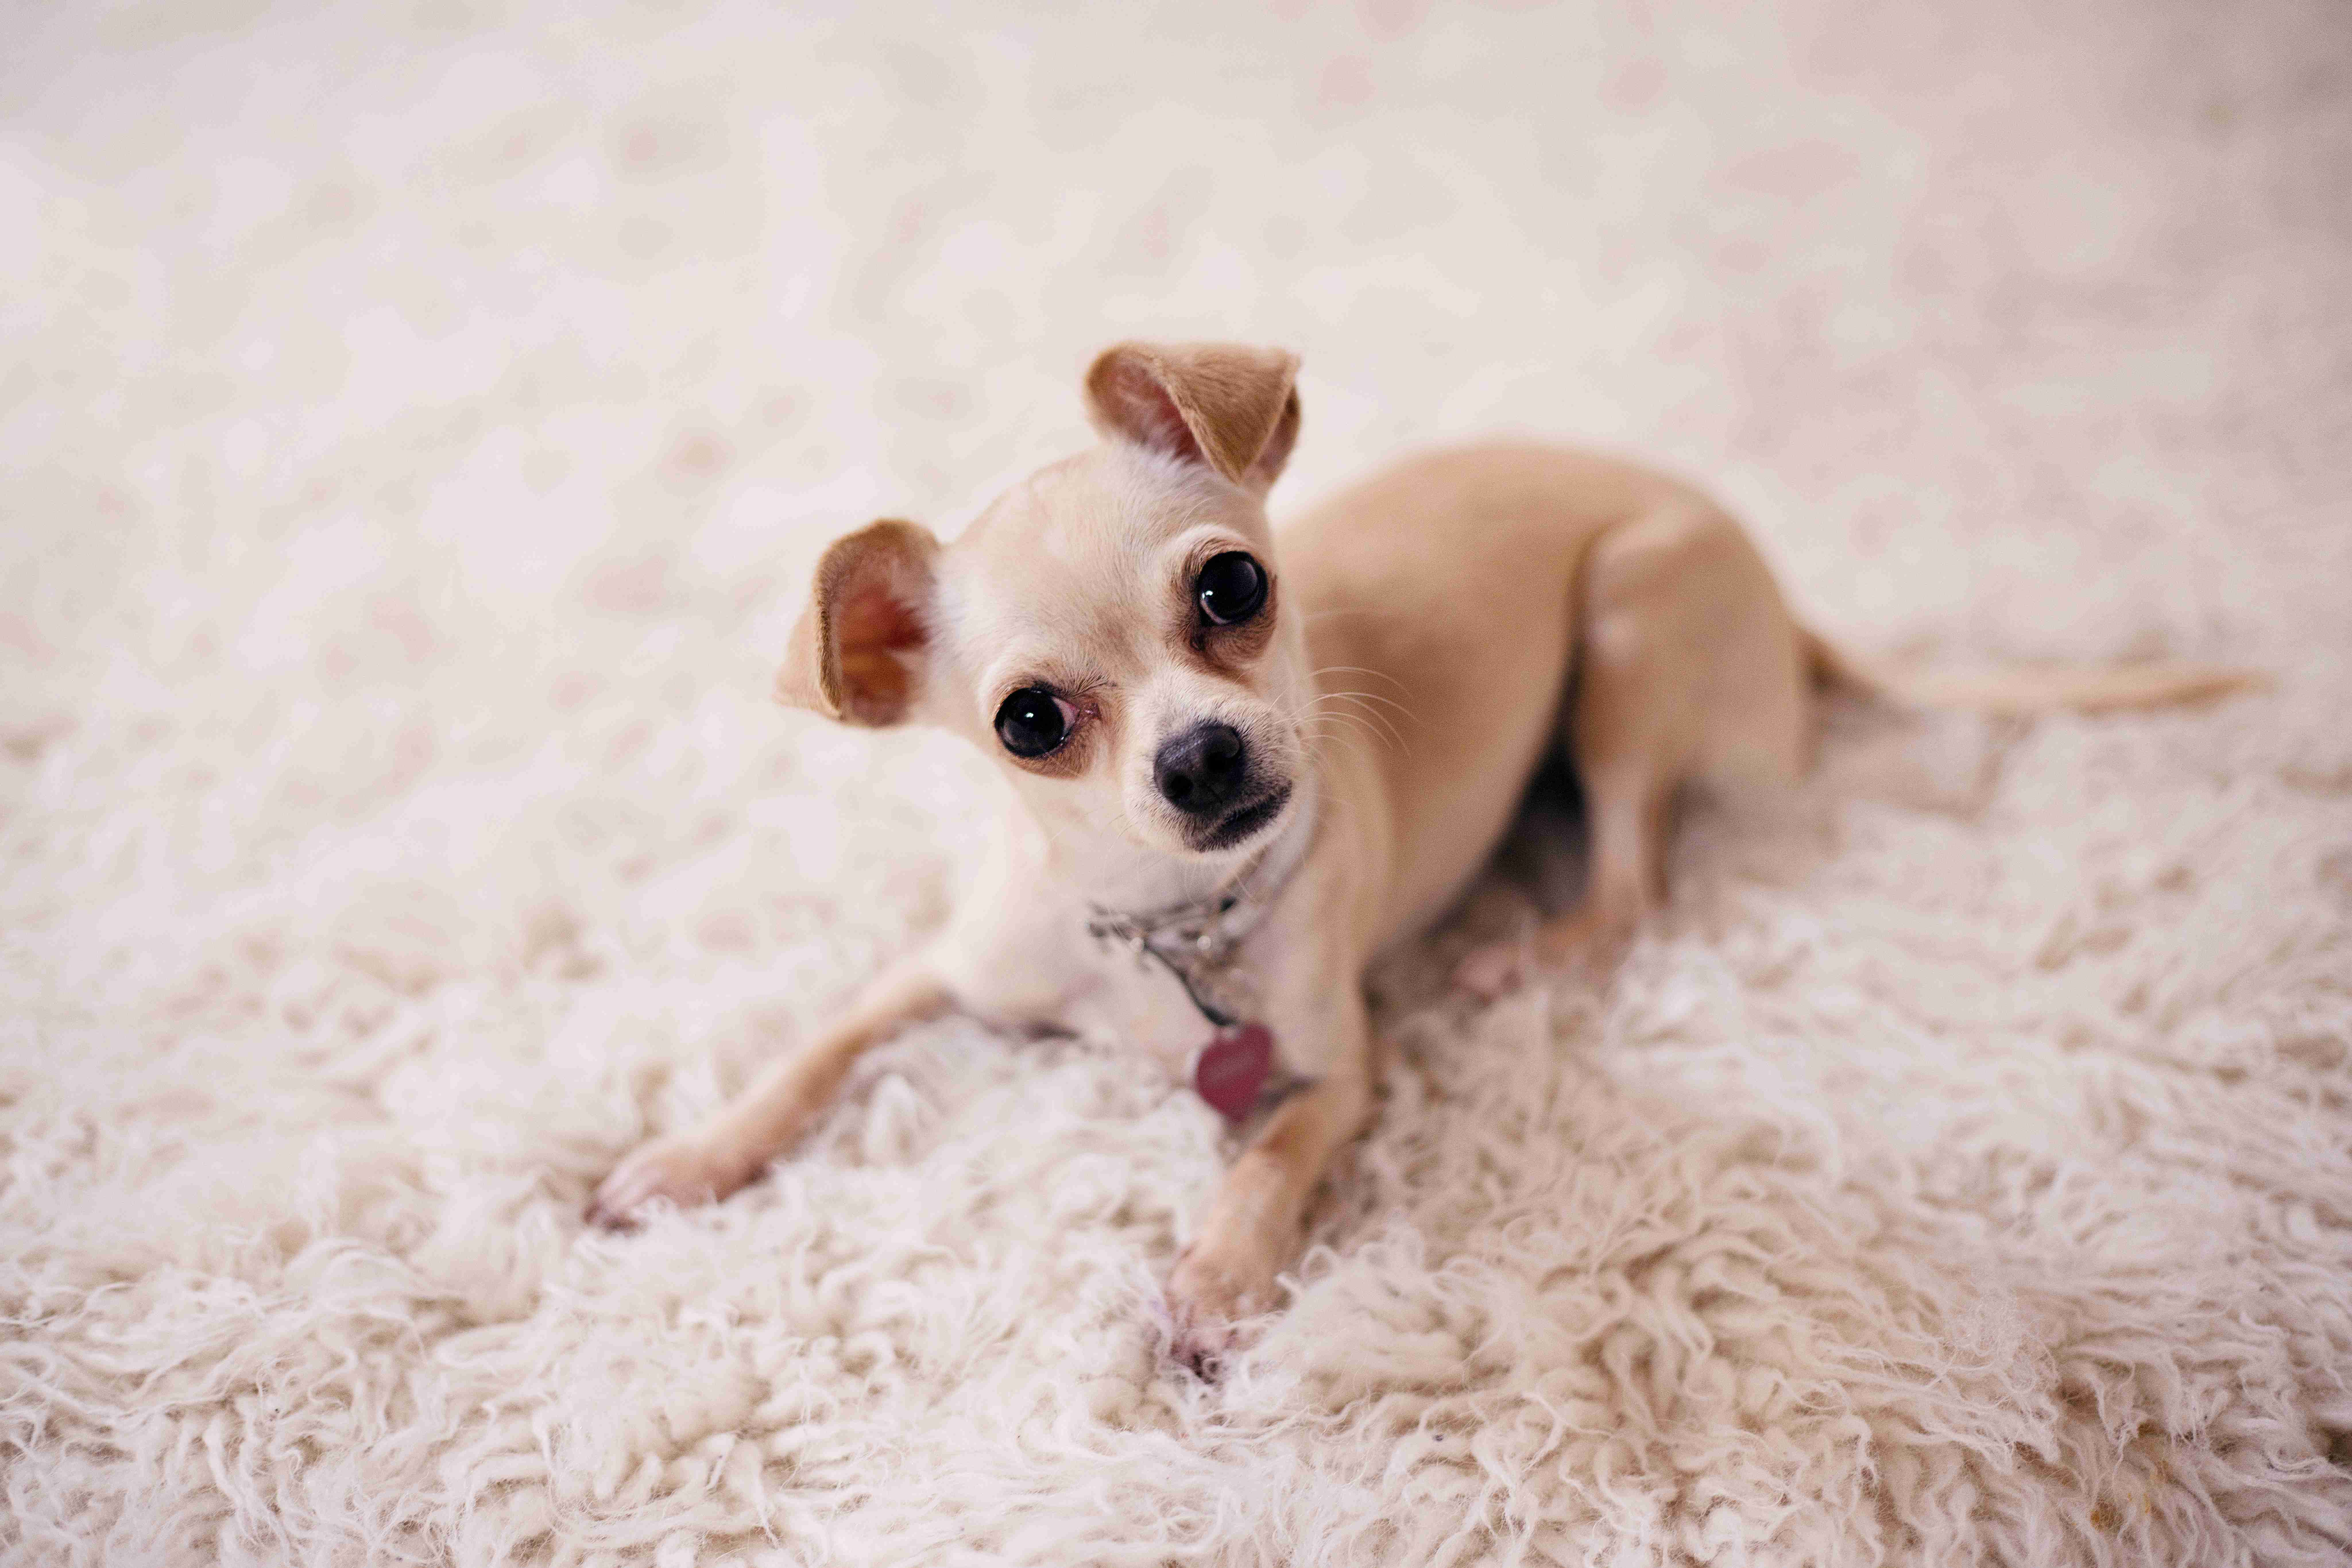 Can Chihuahuas become aggressive towards their owners?